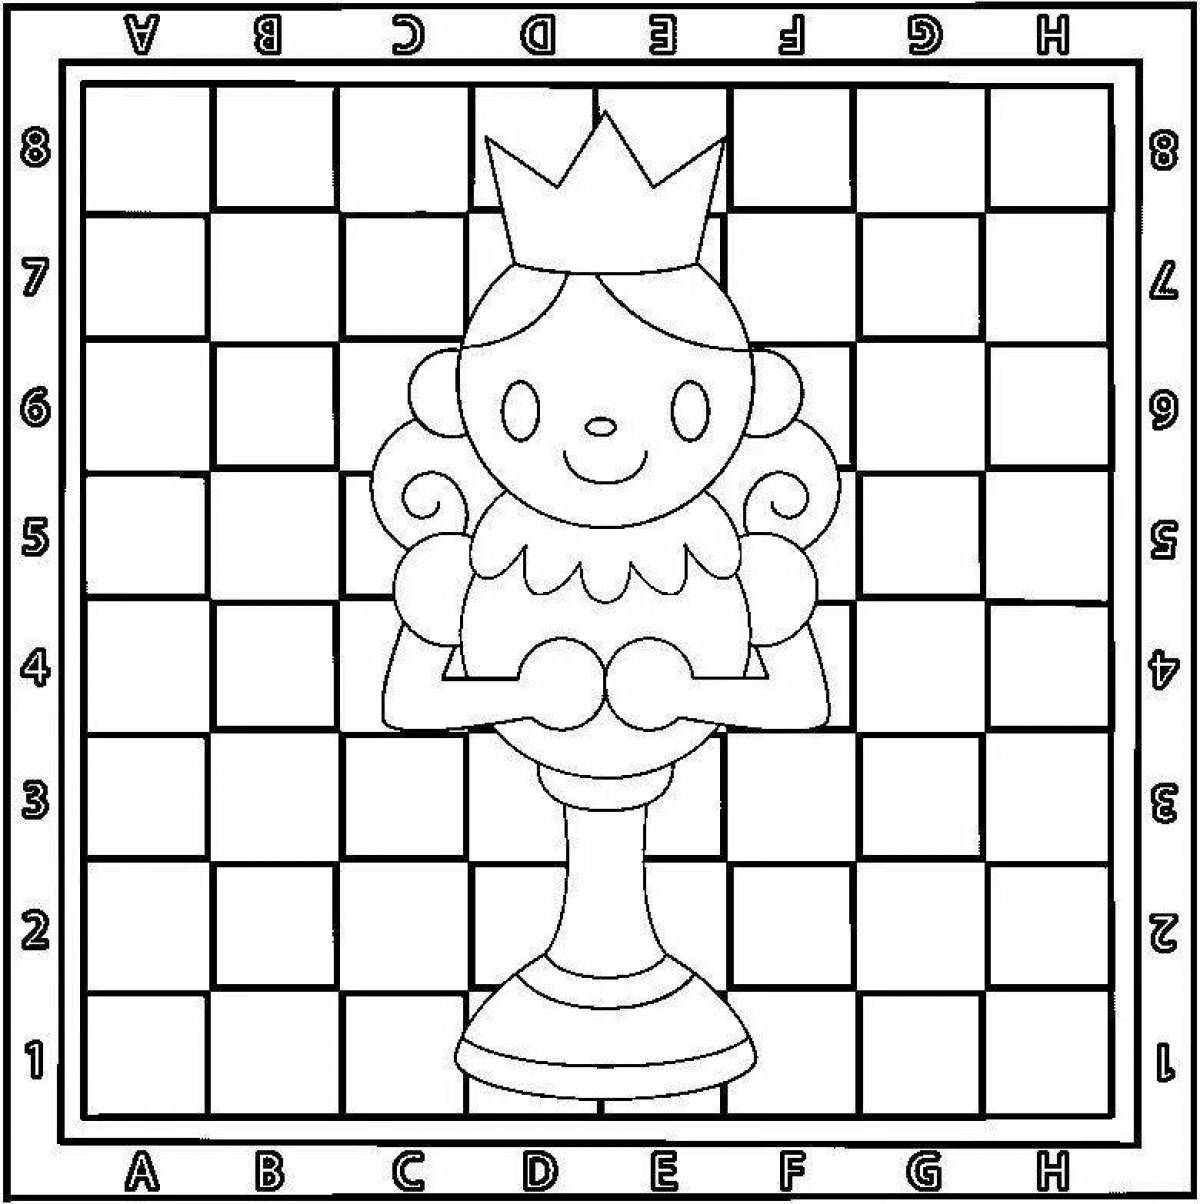 Awesome checkerboard coloring page